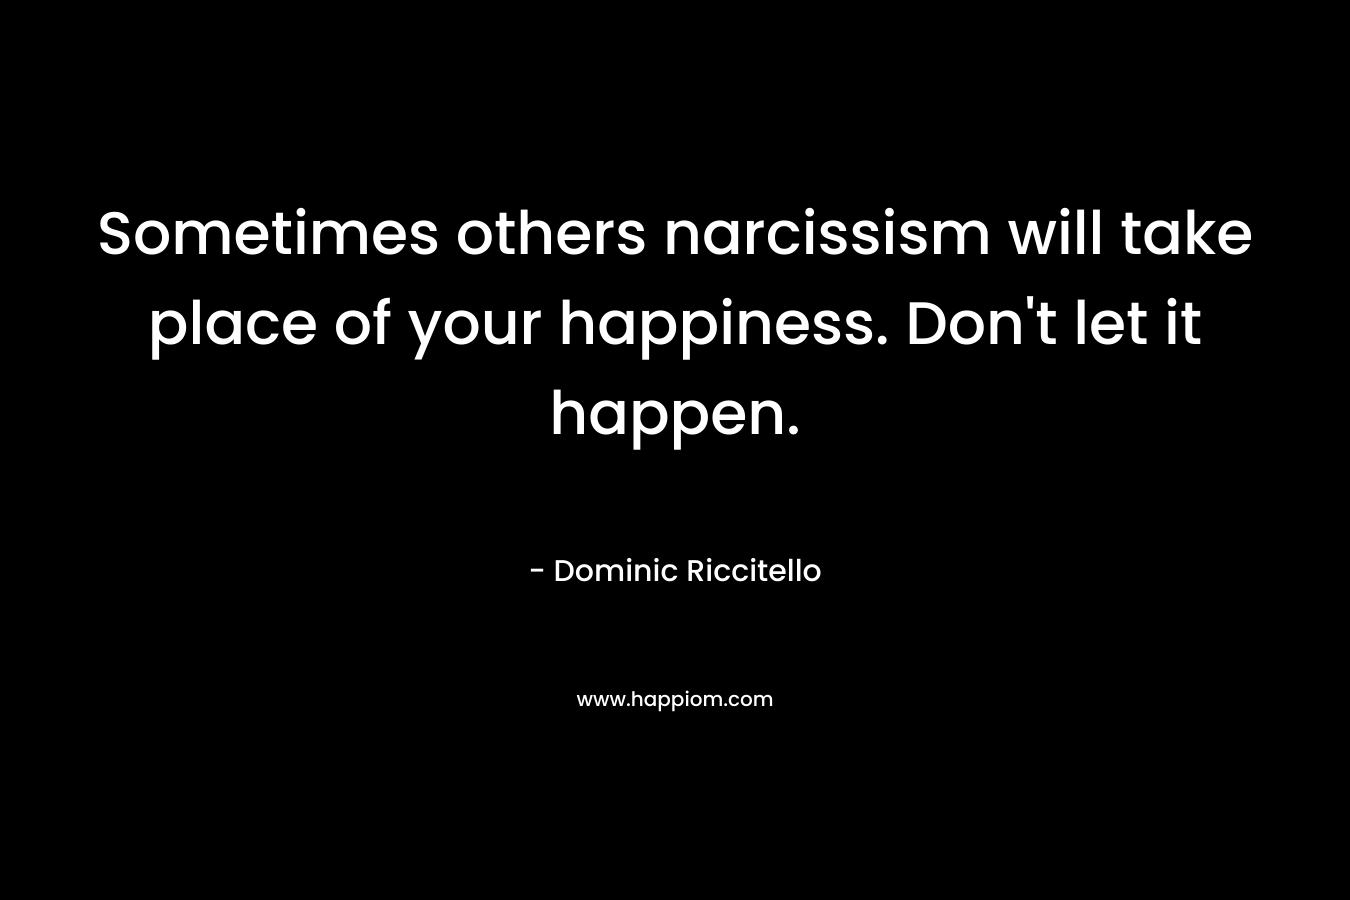 Sometimes others narcissism will take place of your happiness. Don’t let it happen. – Dominic Riccitello